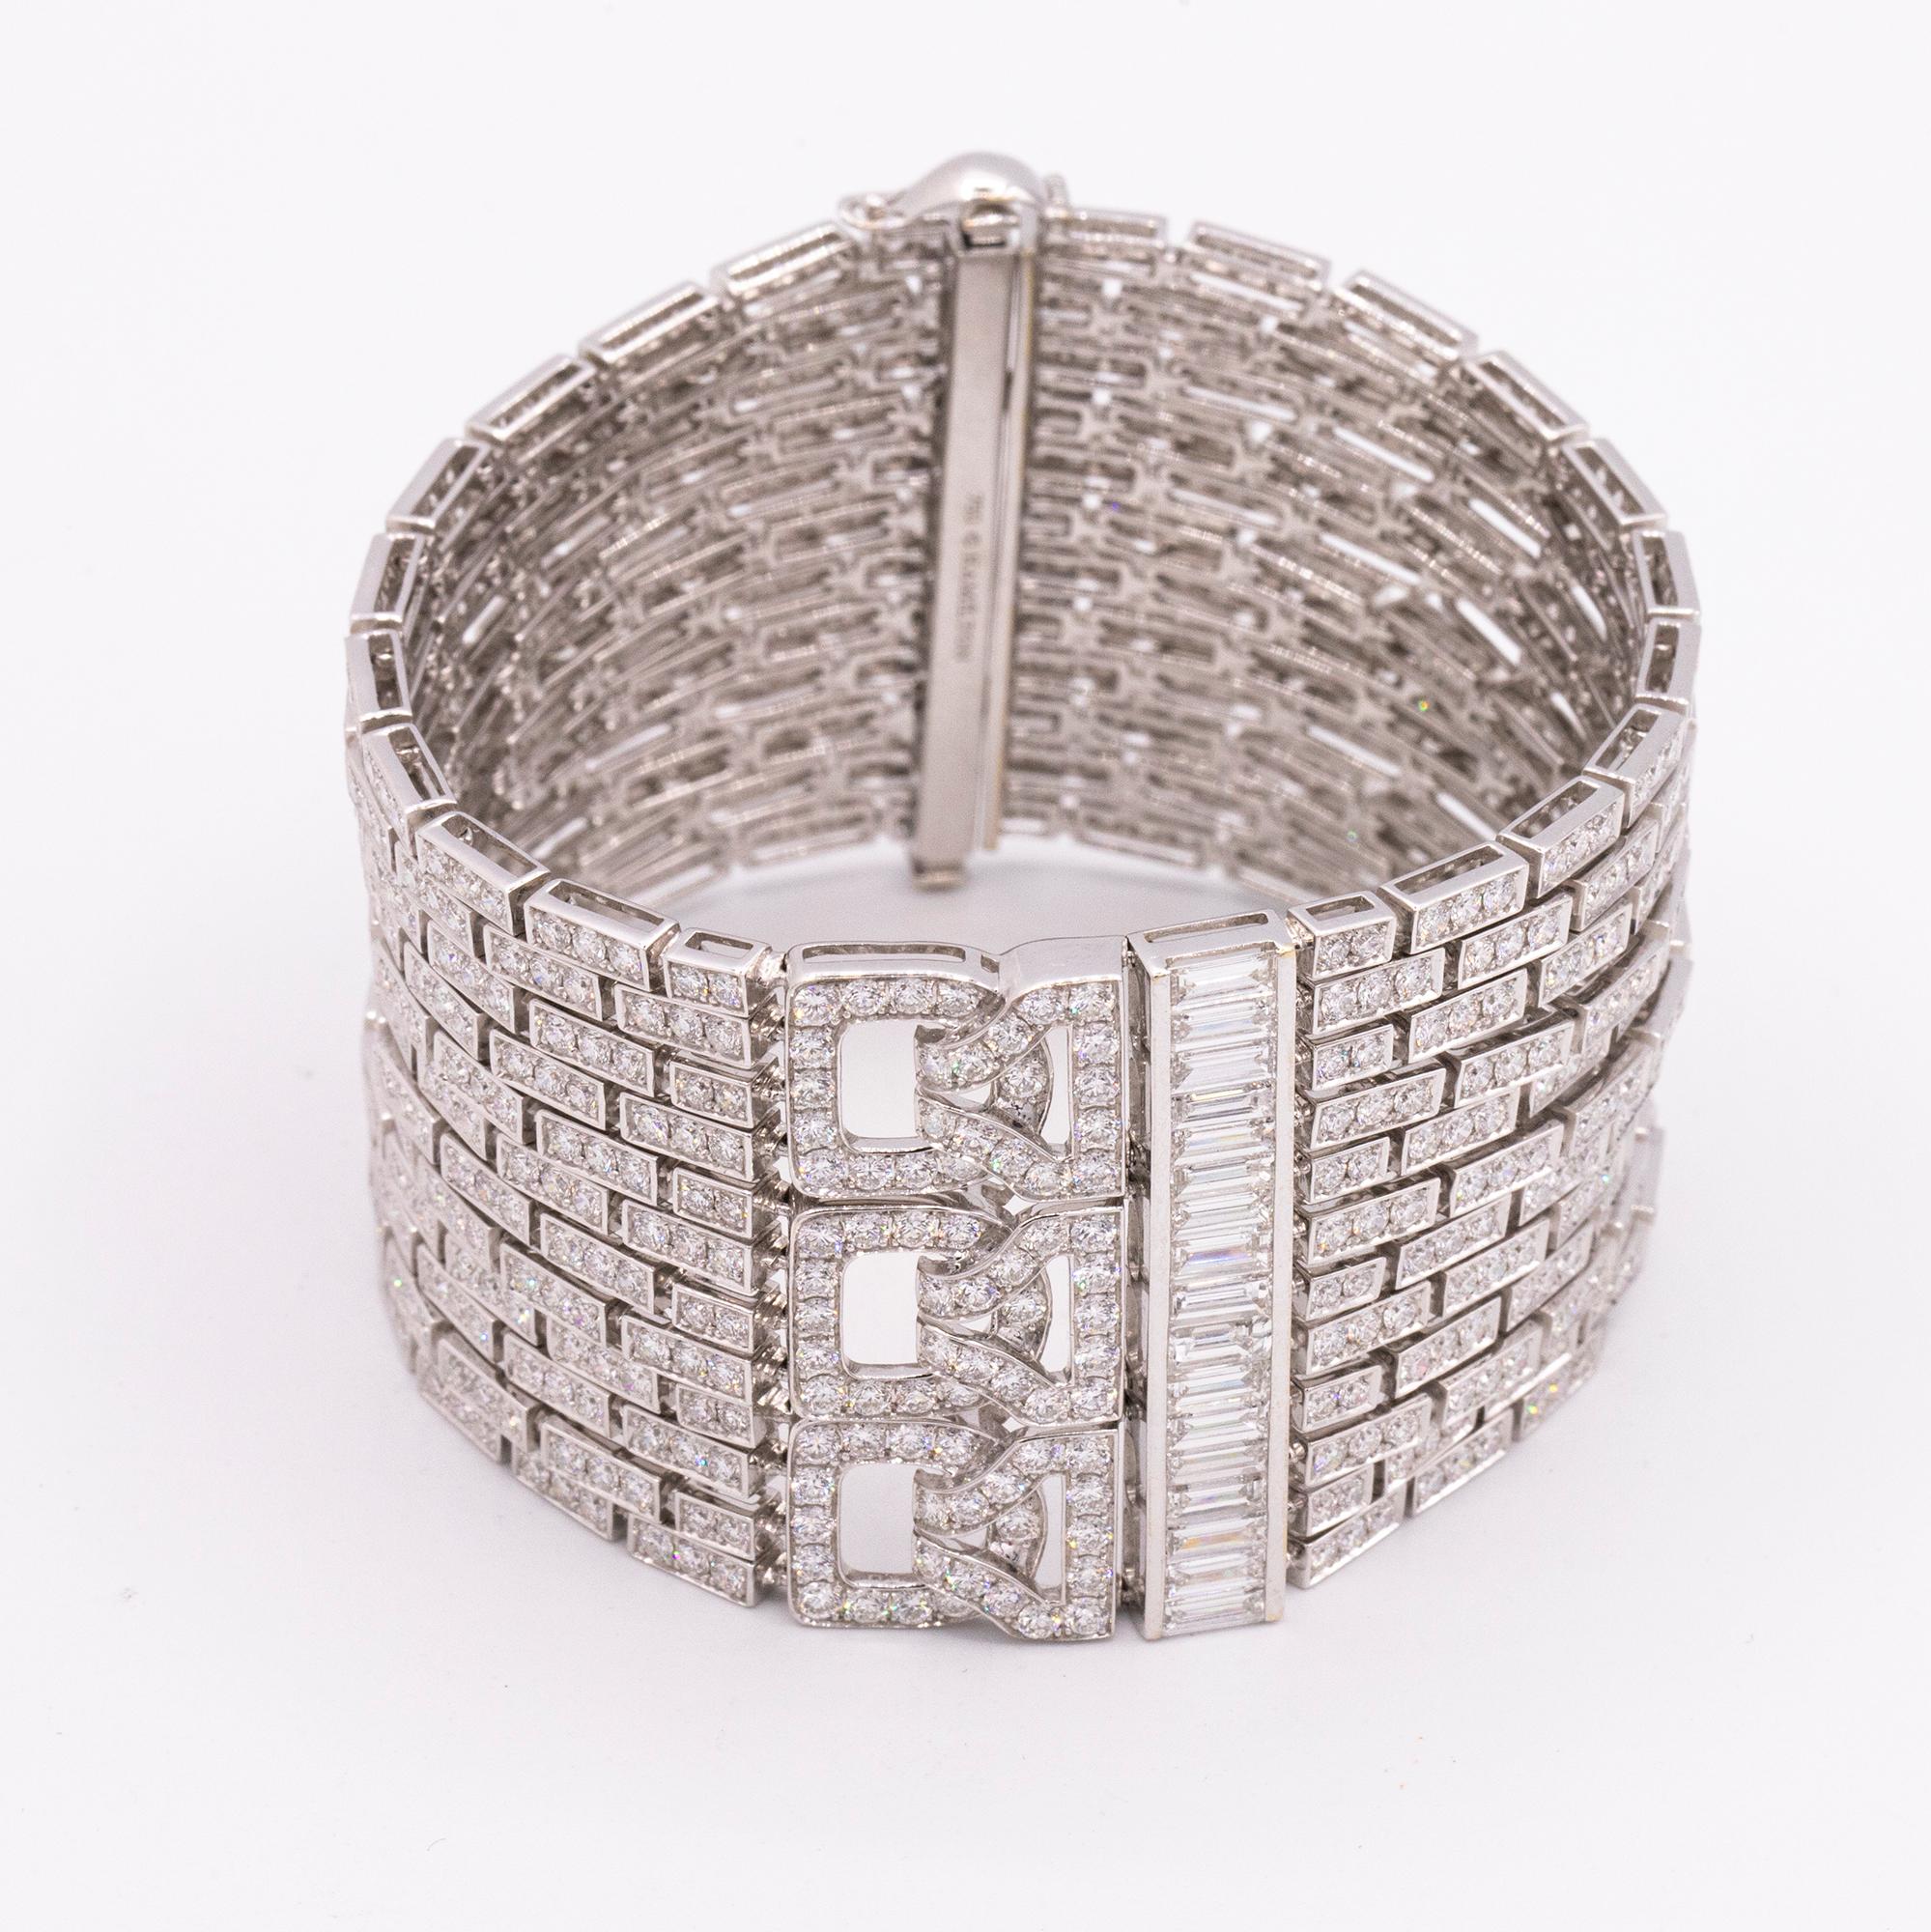 Comfortable is not a word often associated with fine jewelry, let alone diamonds. But this bracelet, a flexible cascade of precious stones, is just that. Twelve rows of gems, each one grouped in rectangular sections and offset to create geometric